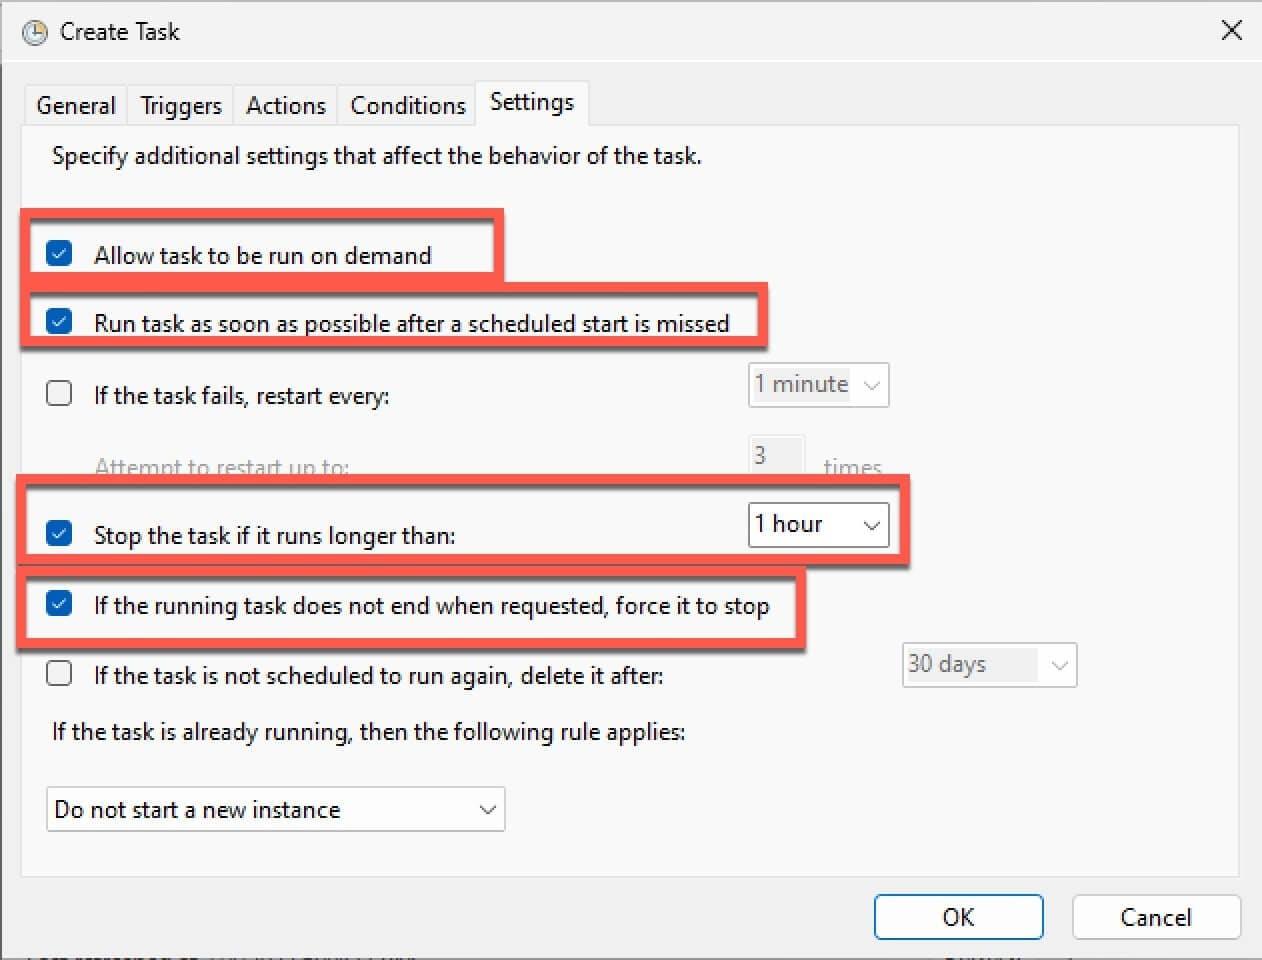 Suggested settings